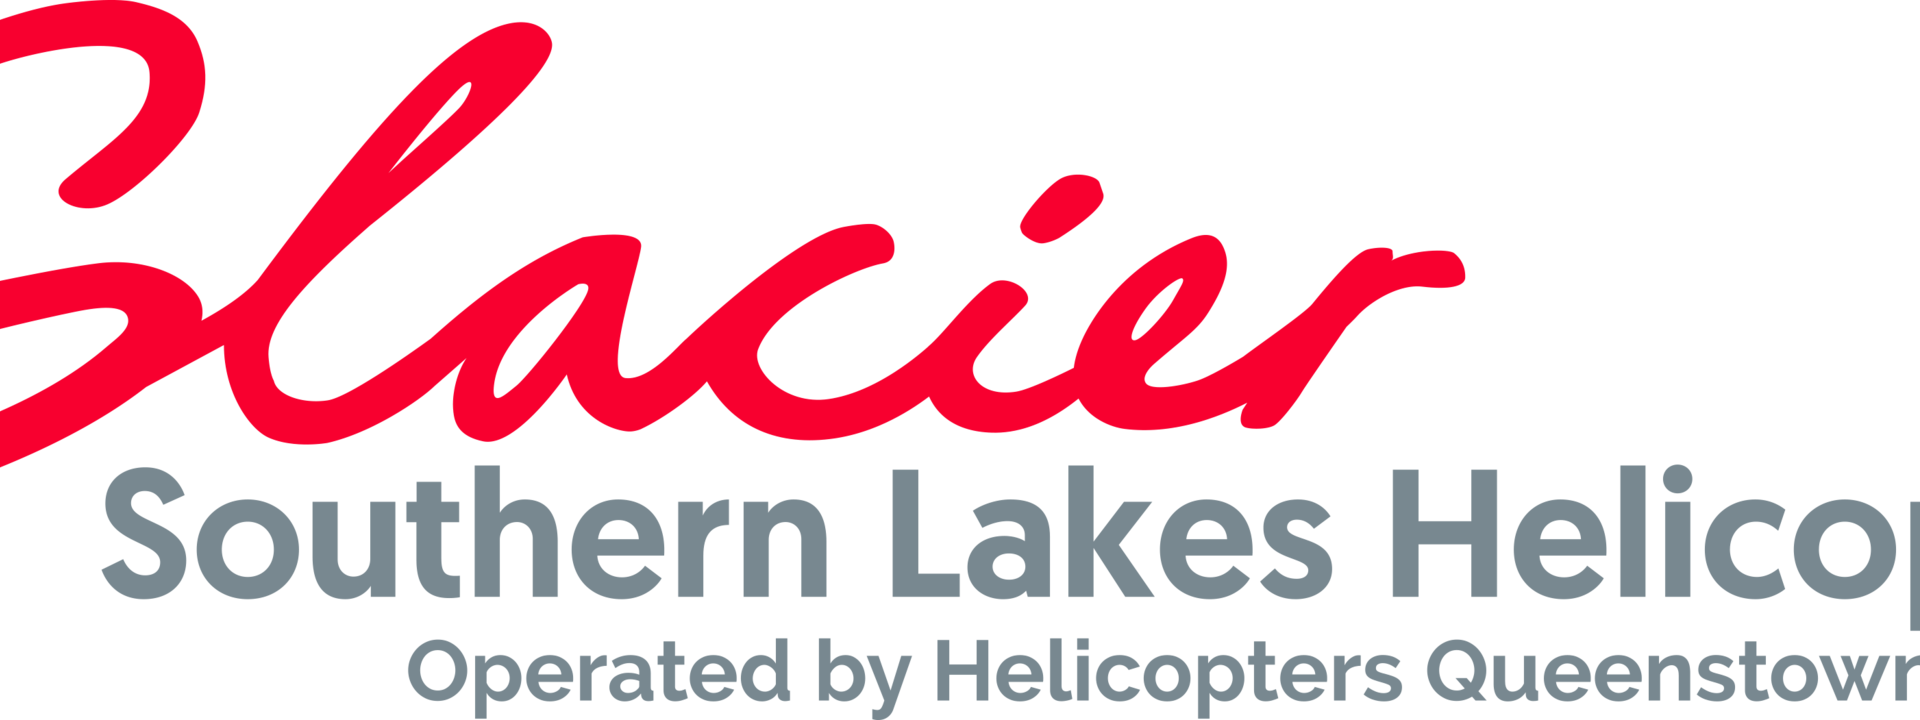 glacier-southern-lakes-helicopters-logo-rgb-colour.png